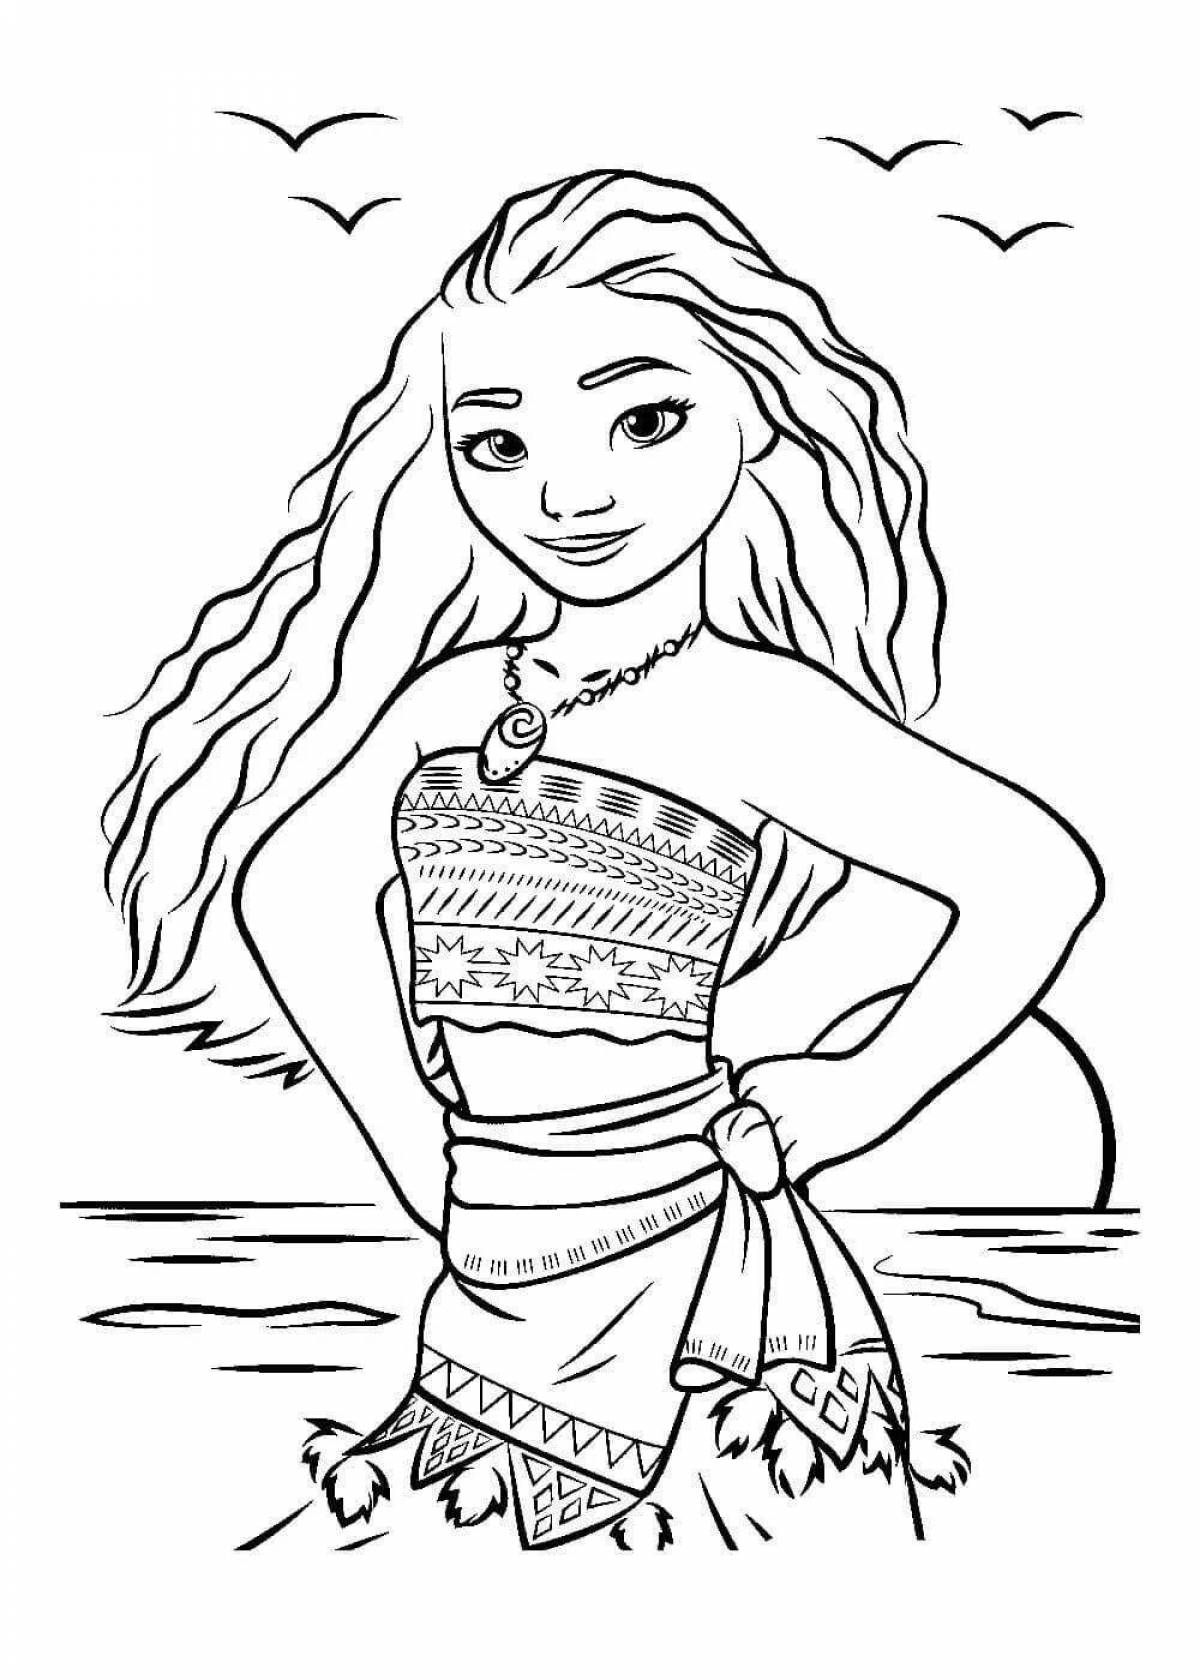 Glorious coloring book for girls 9-12 years old